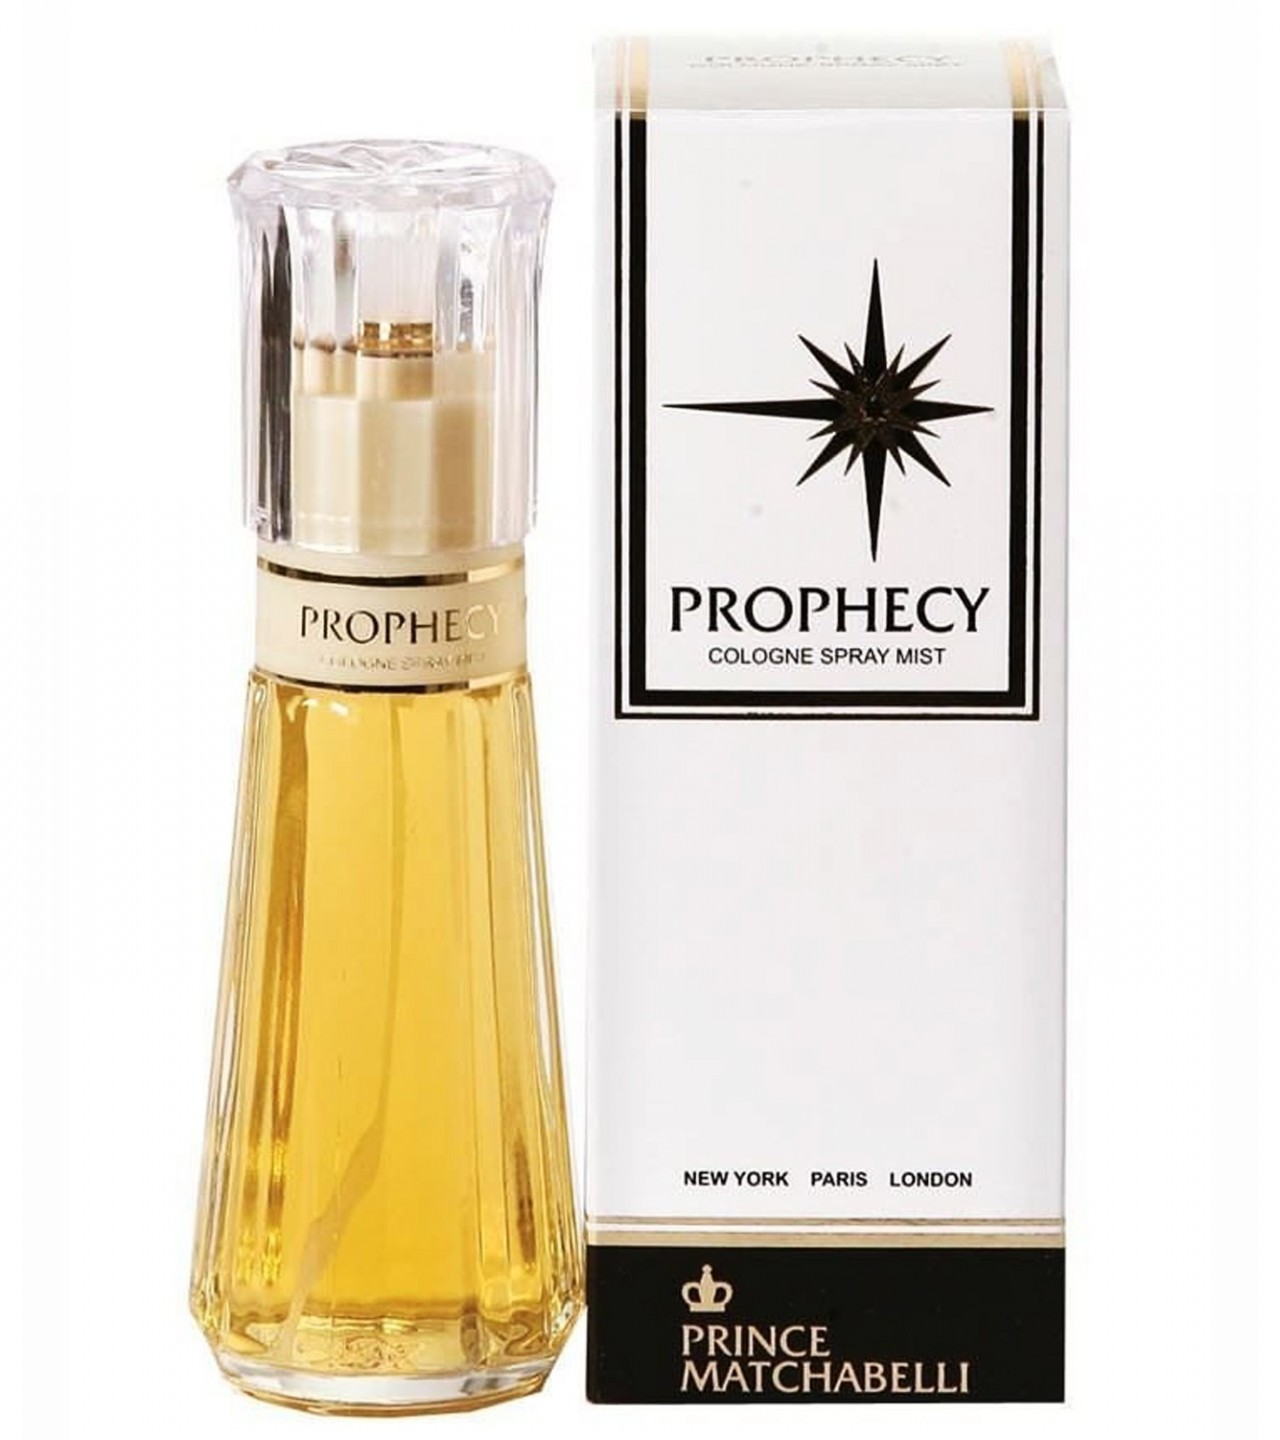 Prince Matchabelli Prophecy Perfume For Unisex – Cologne Spray Mist – 100 ml